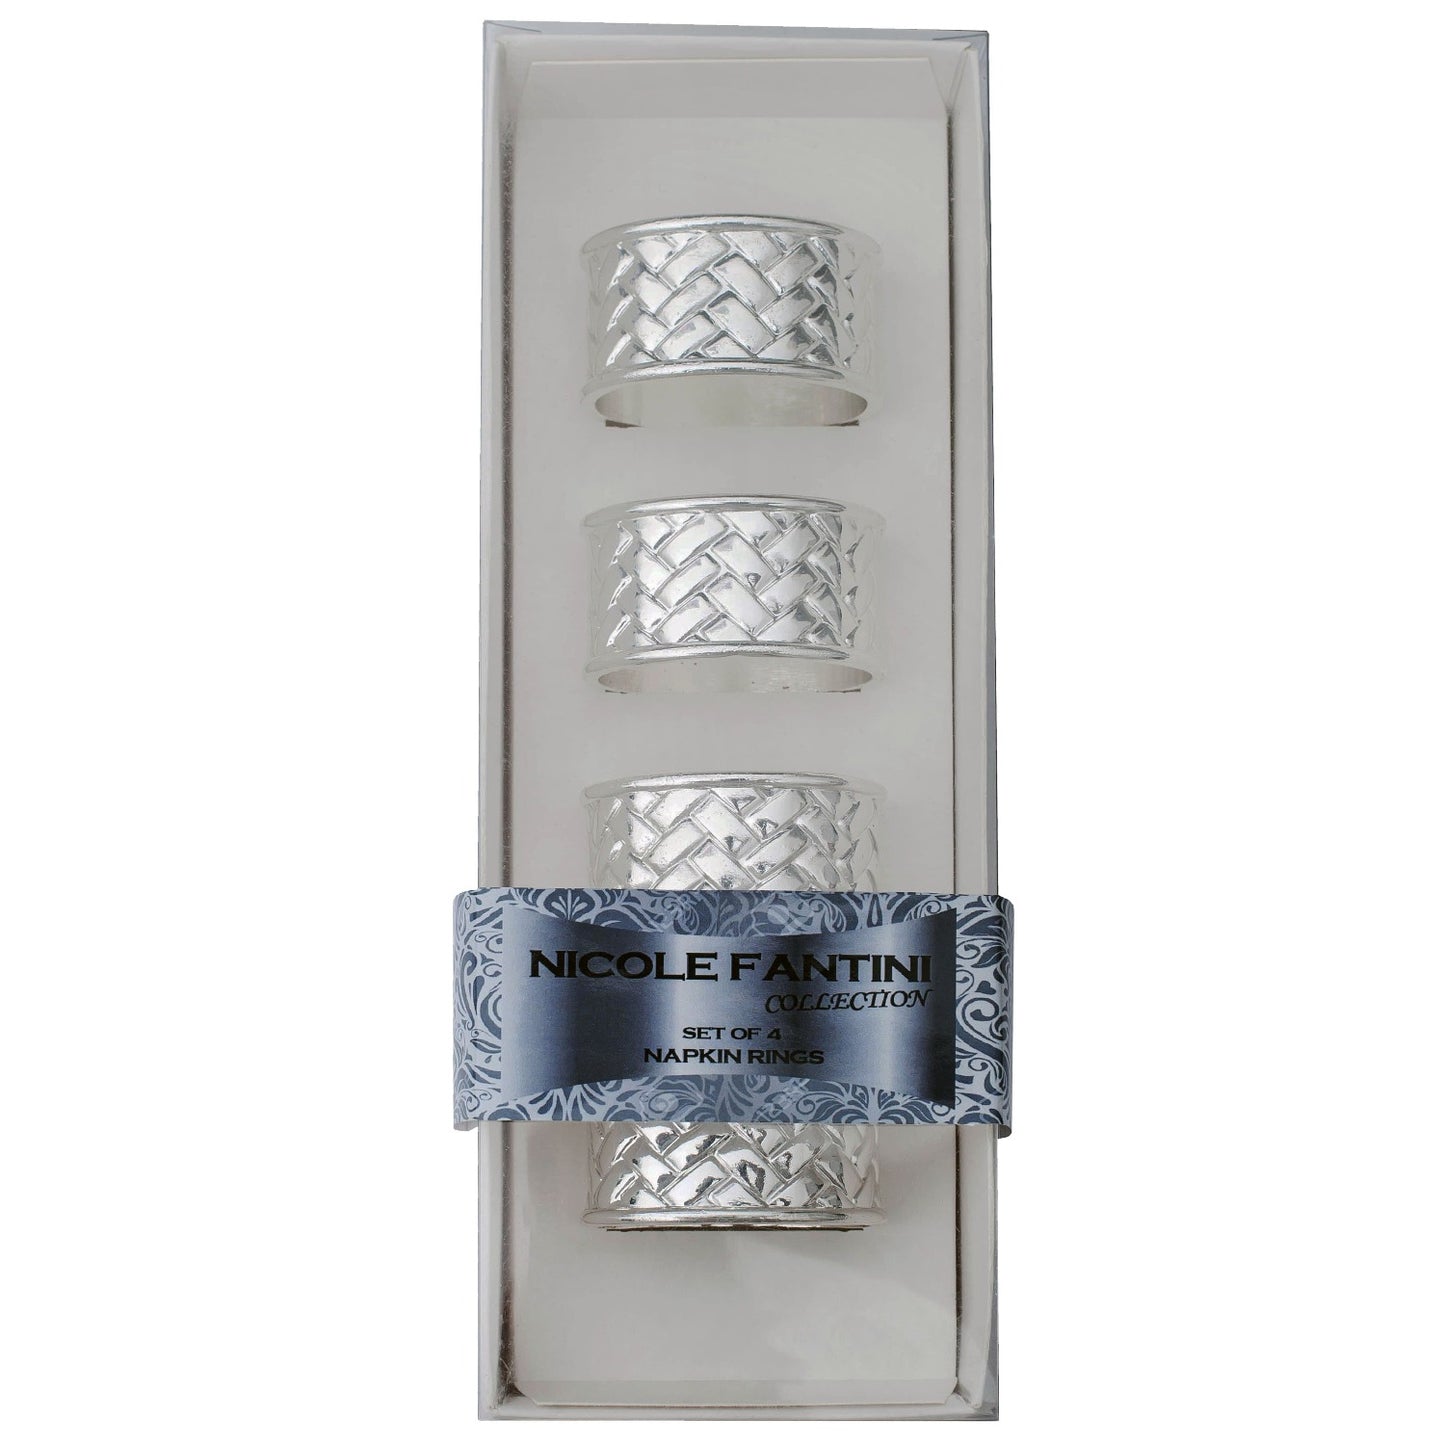 SALE Oval Braided Silver Plated Napkin Rings Set of 4 Napkin Rings Nicole Fantini Collection   